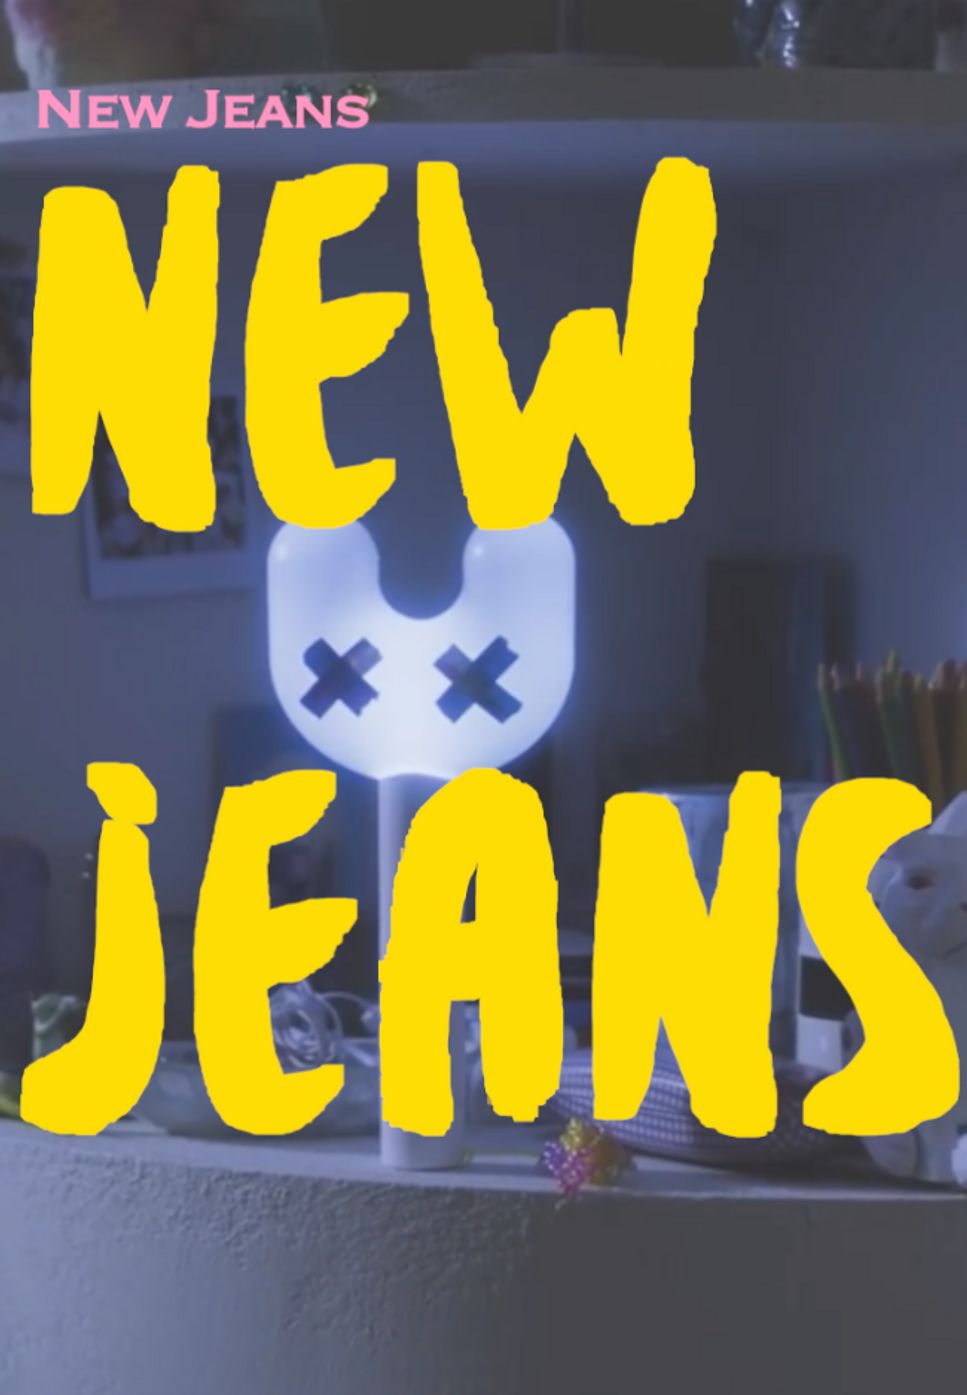 New Jeans - New Jeans Sheets by 247KpopPiano